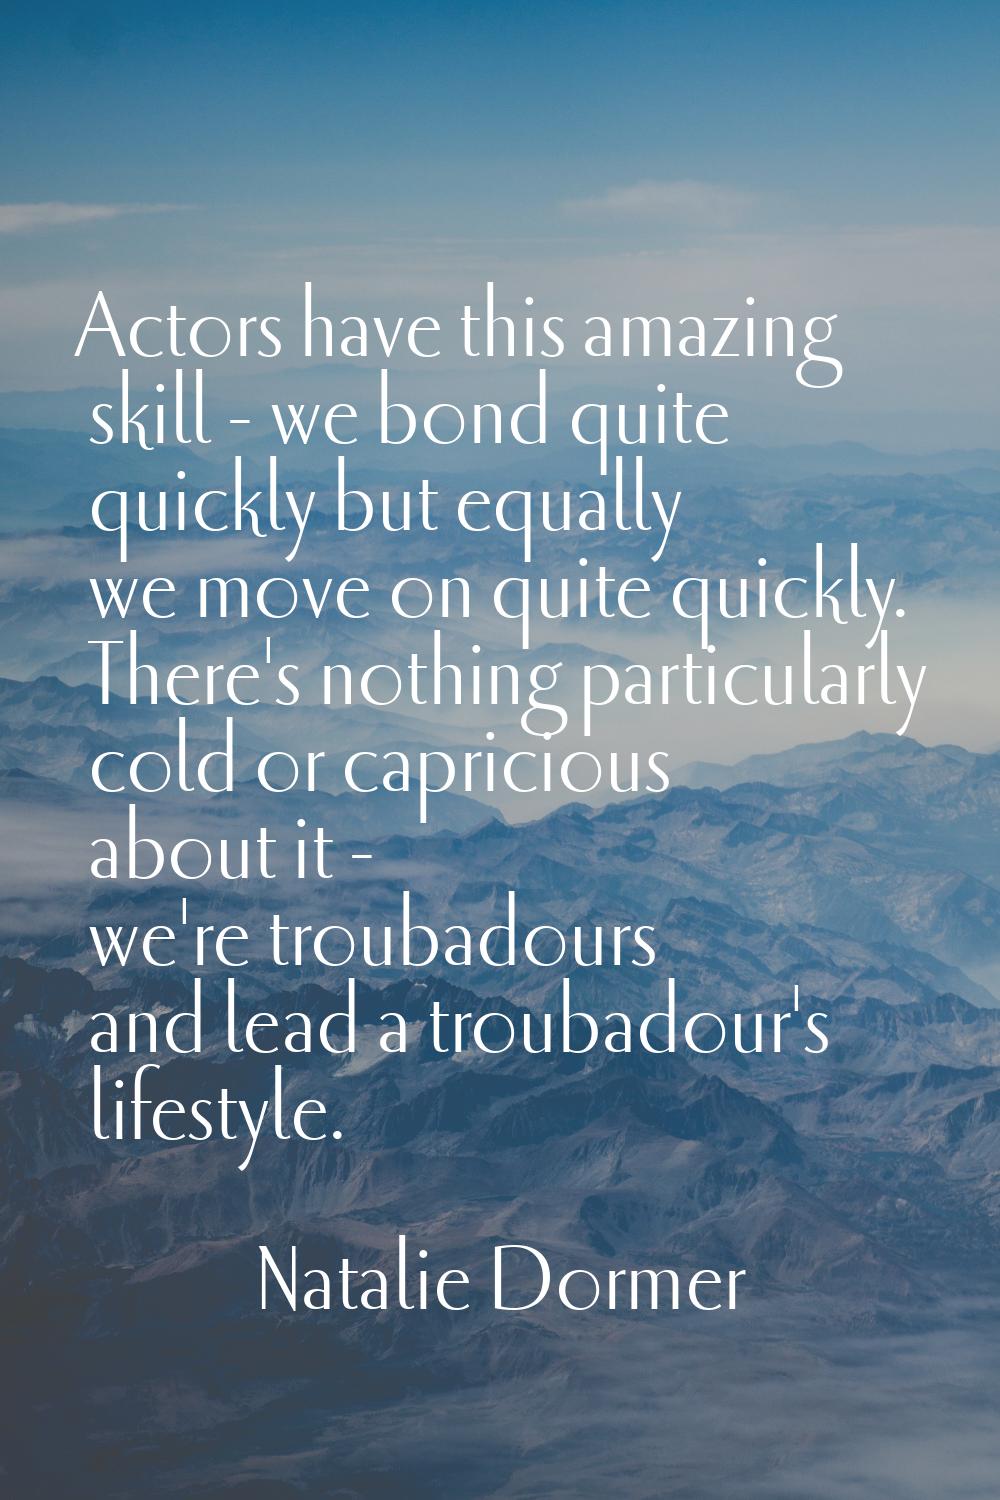 Actors have this amazing skill - we bond quite quickly but equally we move on quite quickly. There'